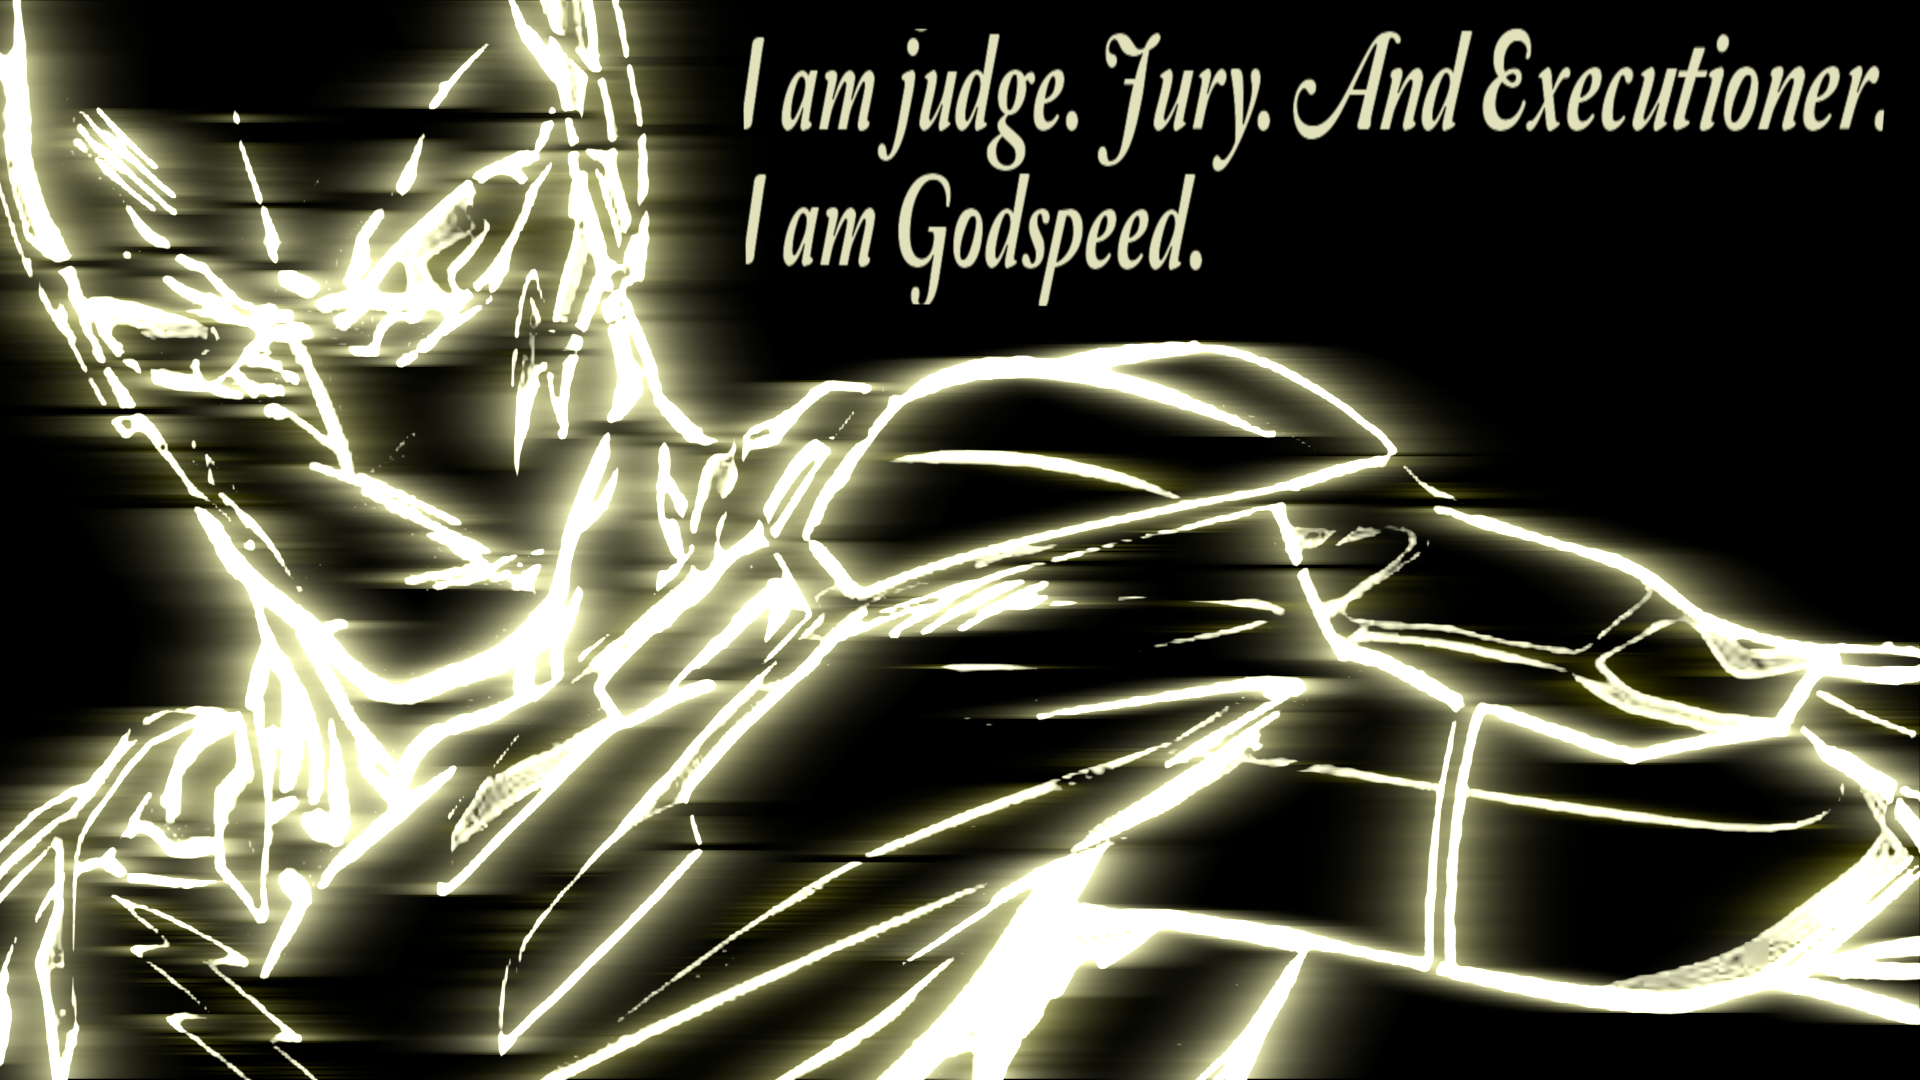 I Am Judge Jury And Executioner Some Godspeed Wallpaper Made In